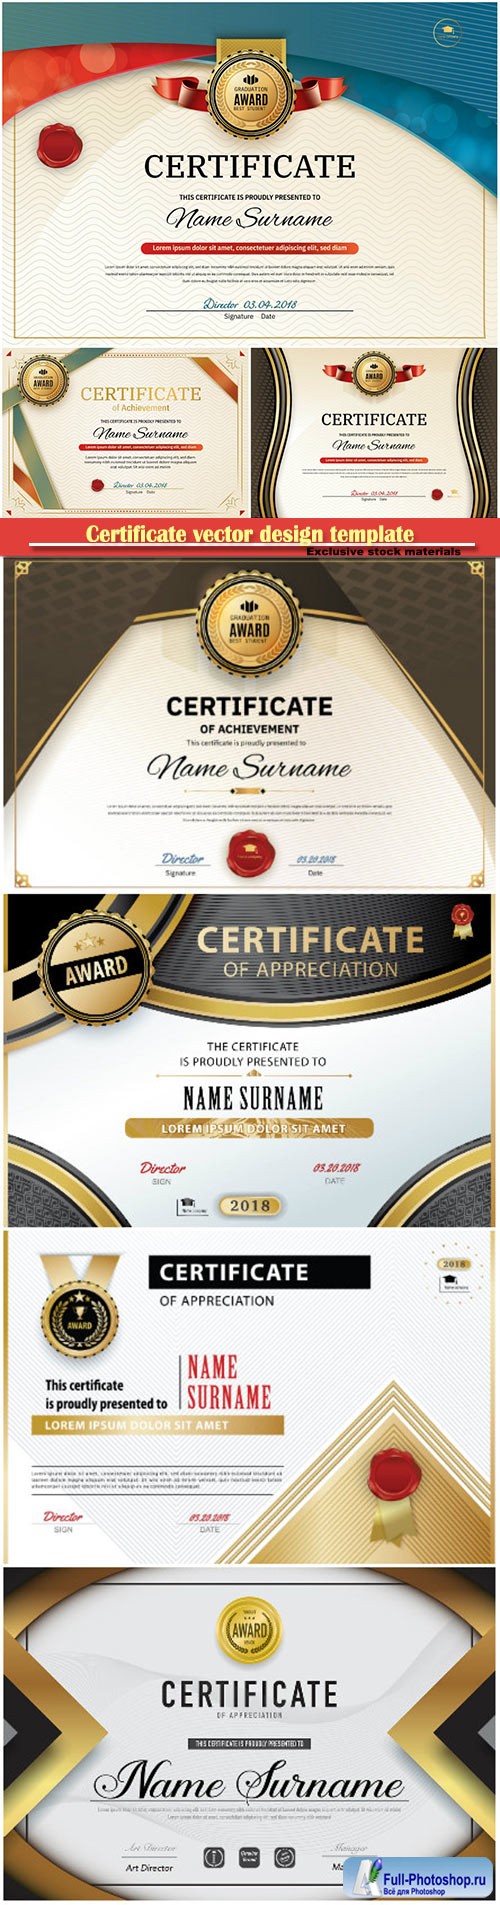 Certificate and vector diploma design template # 65